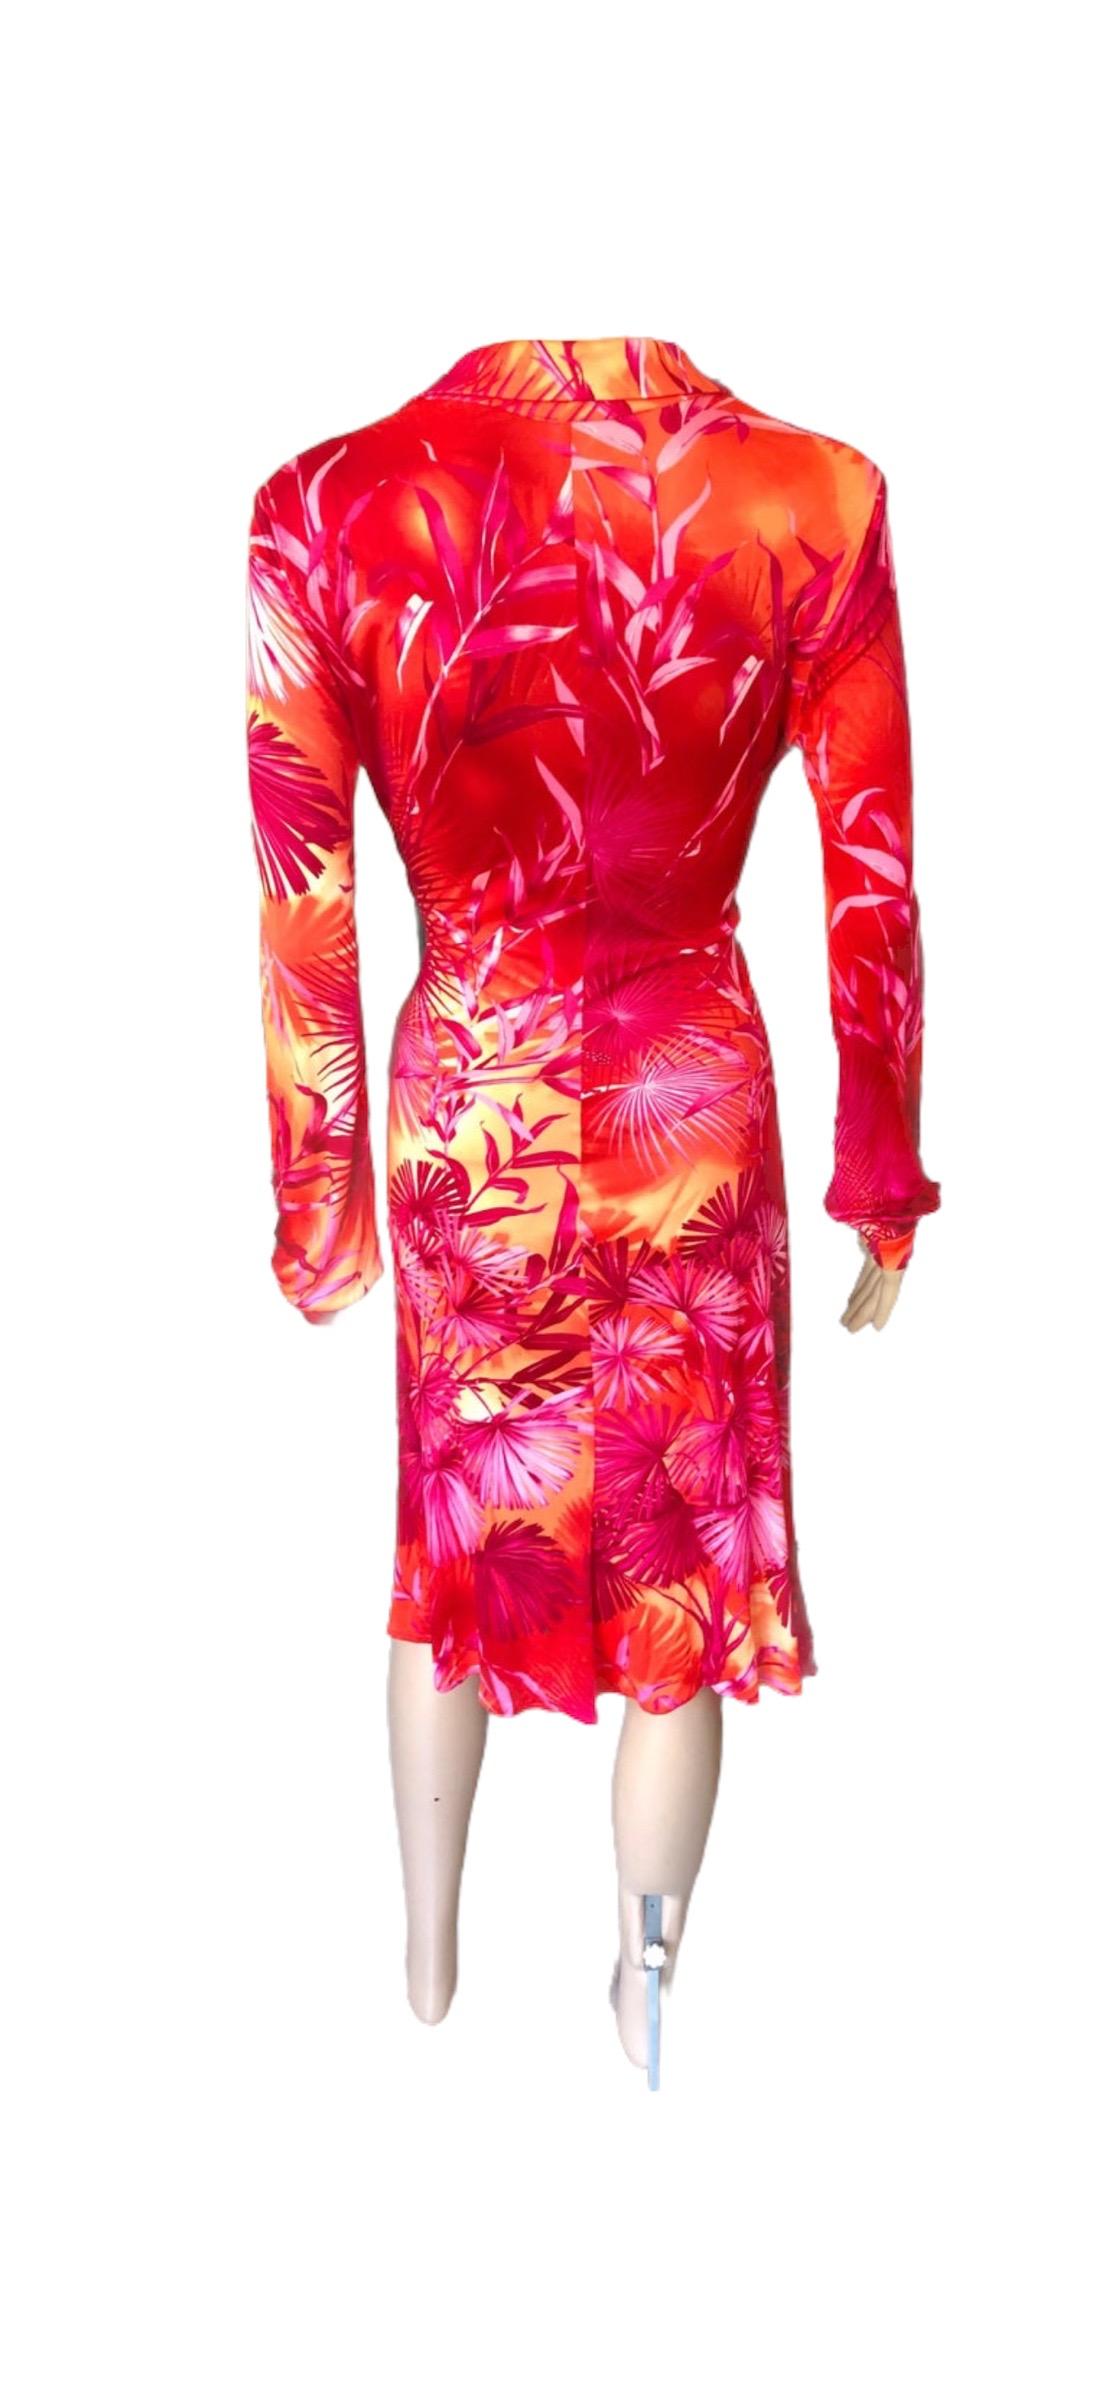 Gianni Versace Runway S/S 2000 Vintage Tropical Print Plunging Neckline Dress For Sale 4